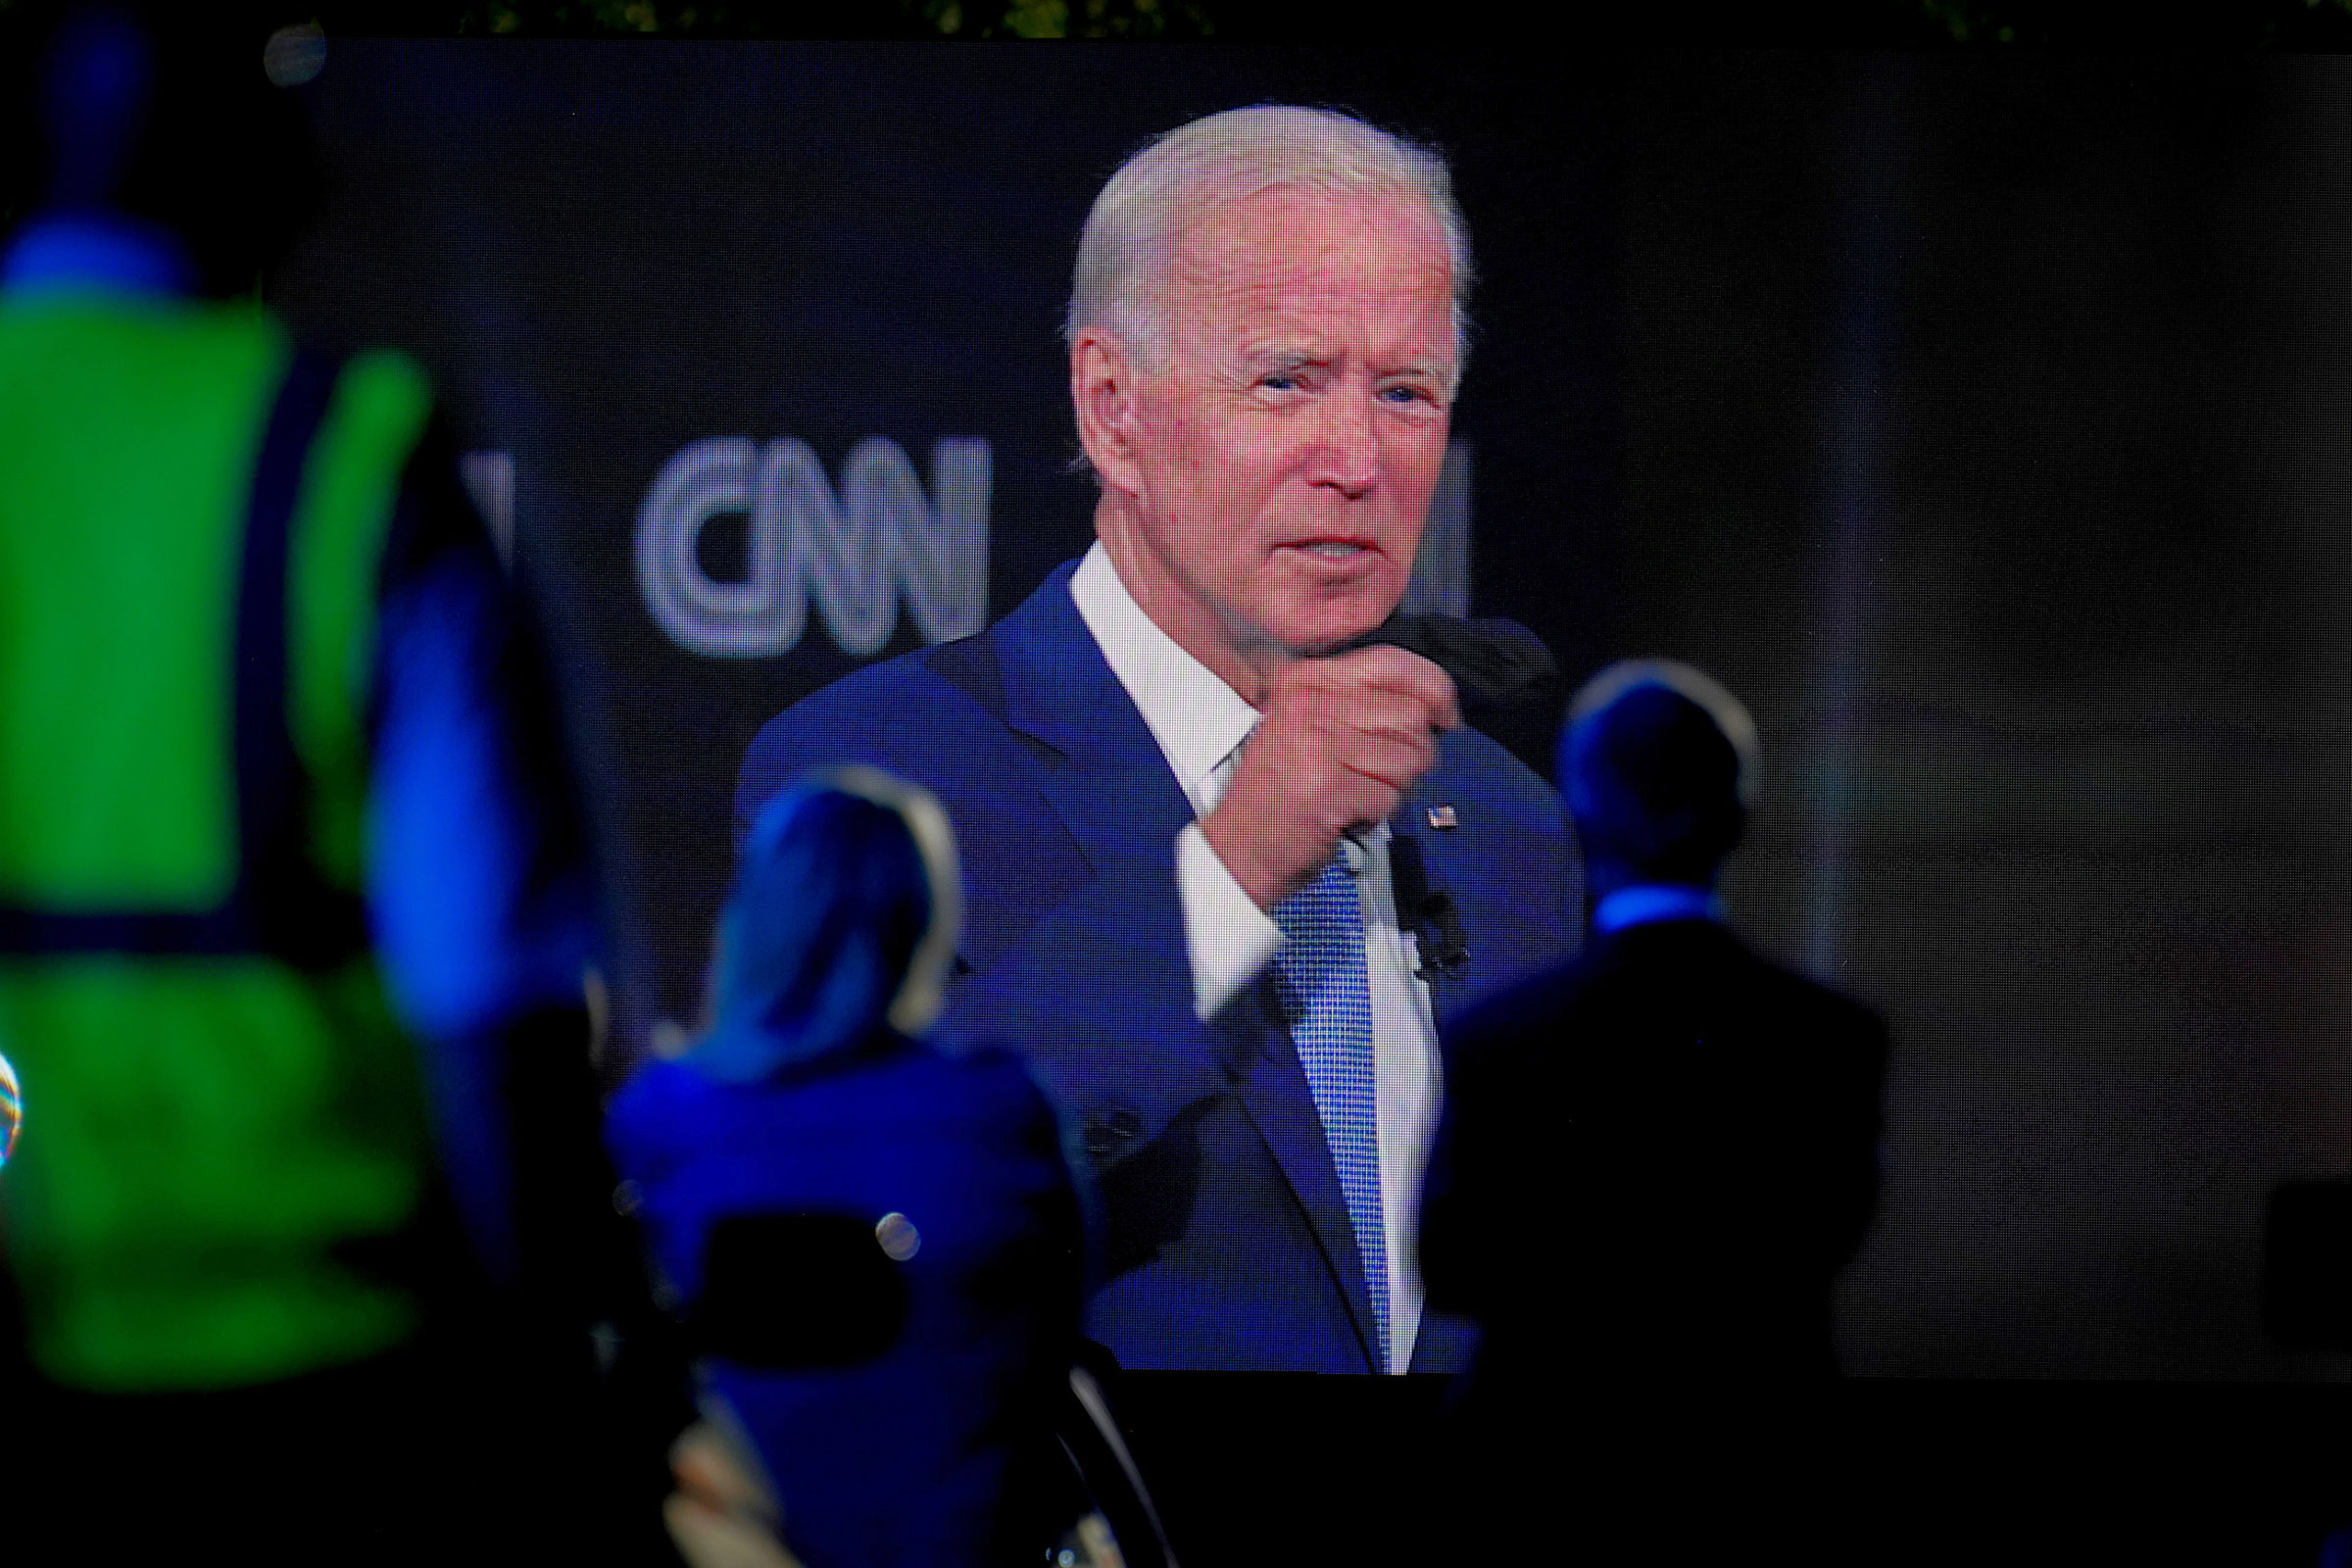 Democratic presidential nominee Joe Biden appears via video at a CNN town hall-style campaign event in Scranton, Pa., Sept. 17, 2020. (Erin Schaff/The New York Times)